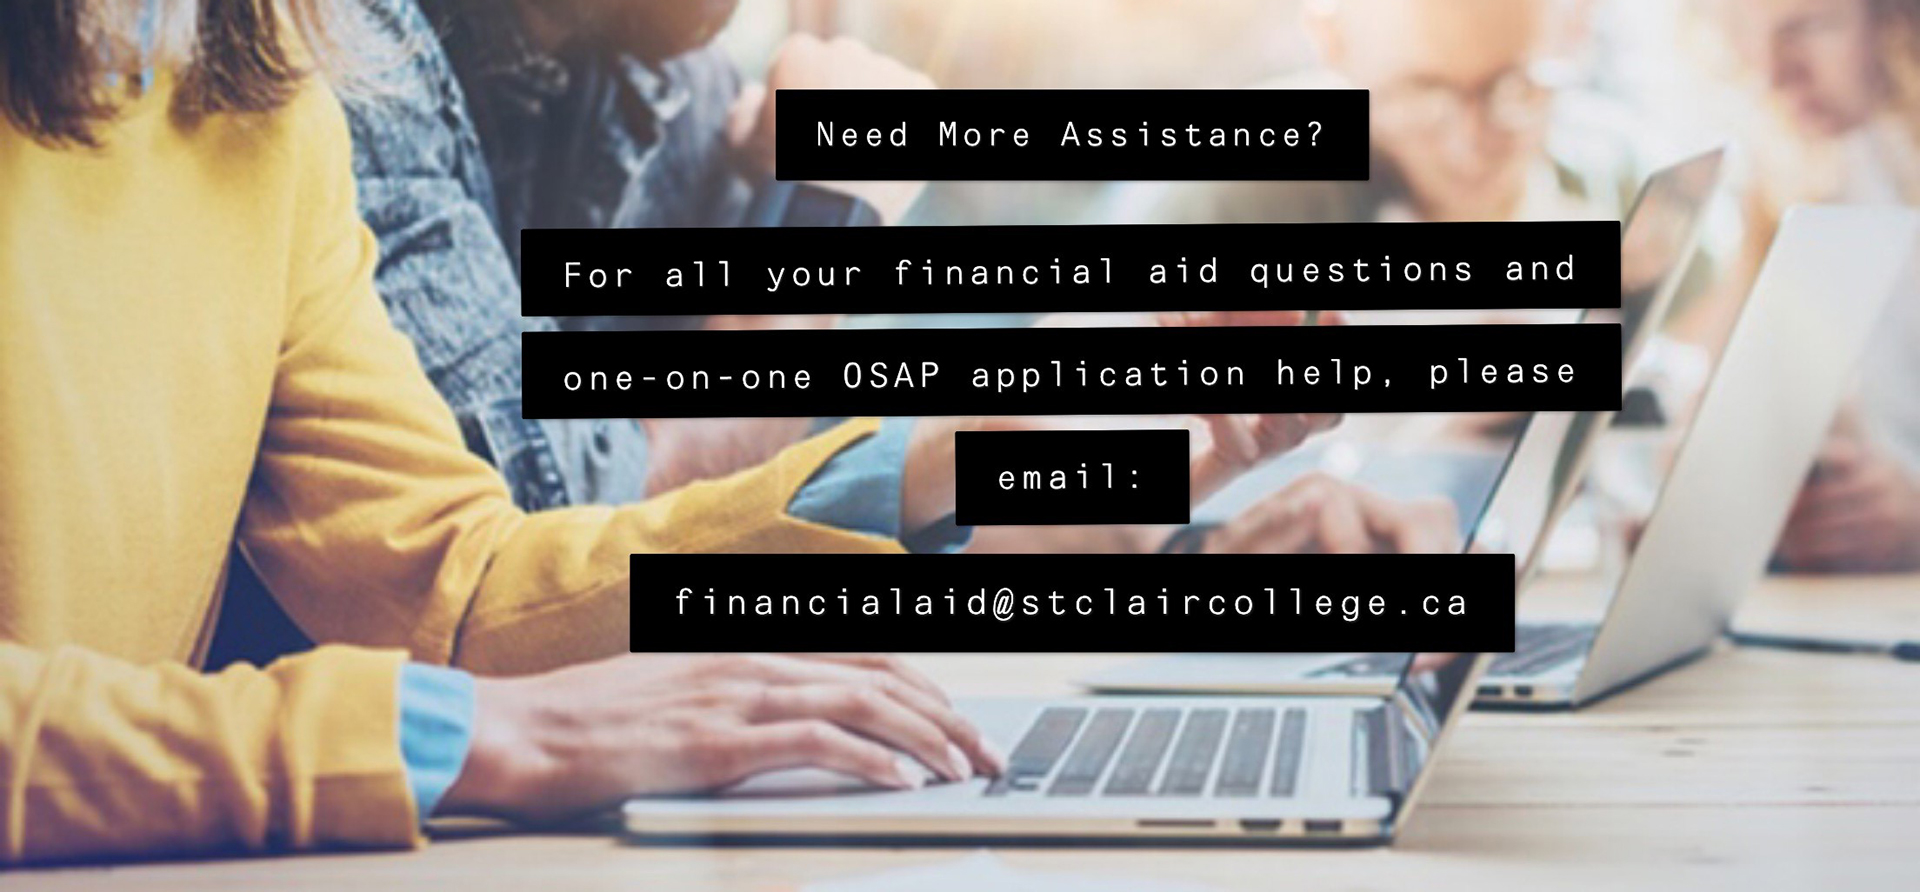 Email financialaid@stclaircollege.ca for more assistance.